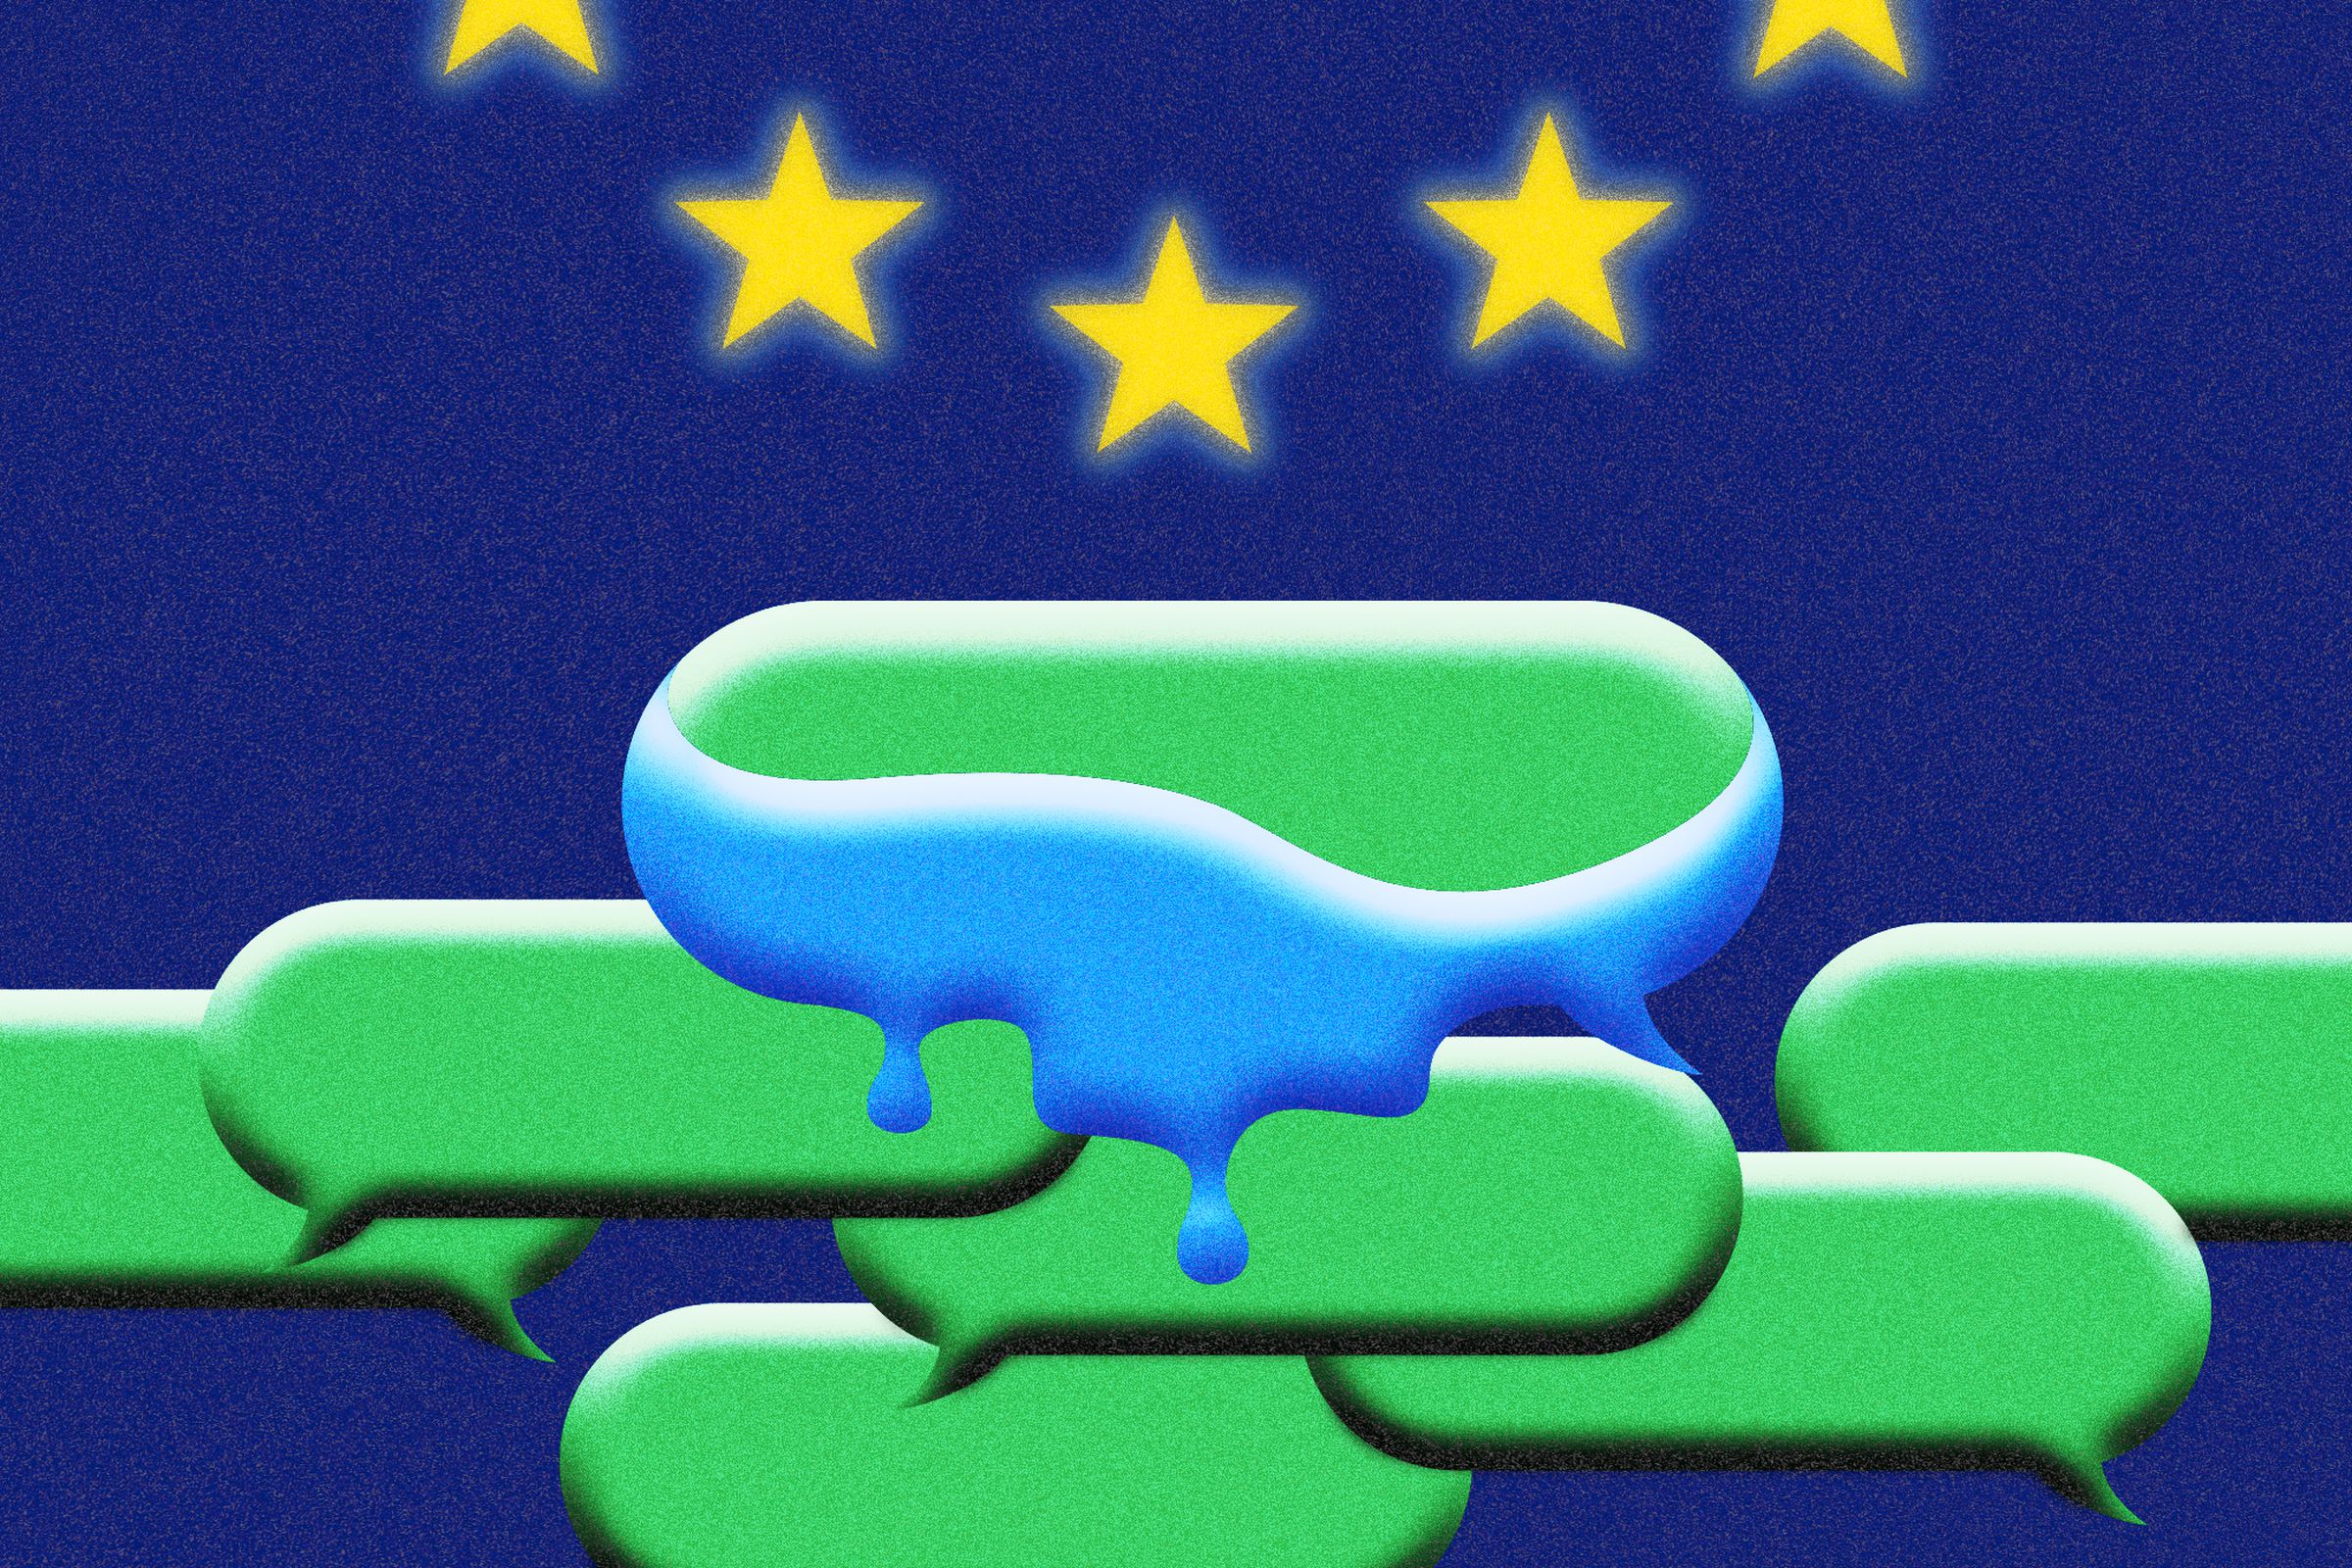 Illustration of the stars of the European Union melting the blue color off of an iMessage bubble, to show the pressure on Apple to open up iMessage.